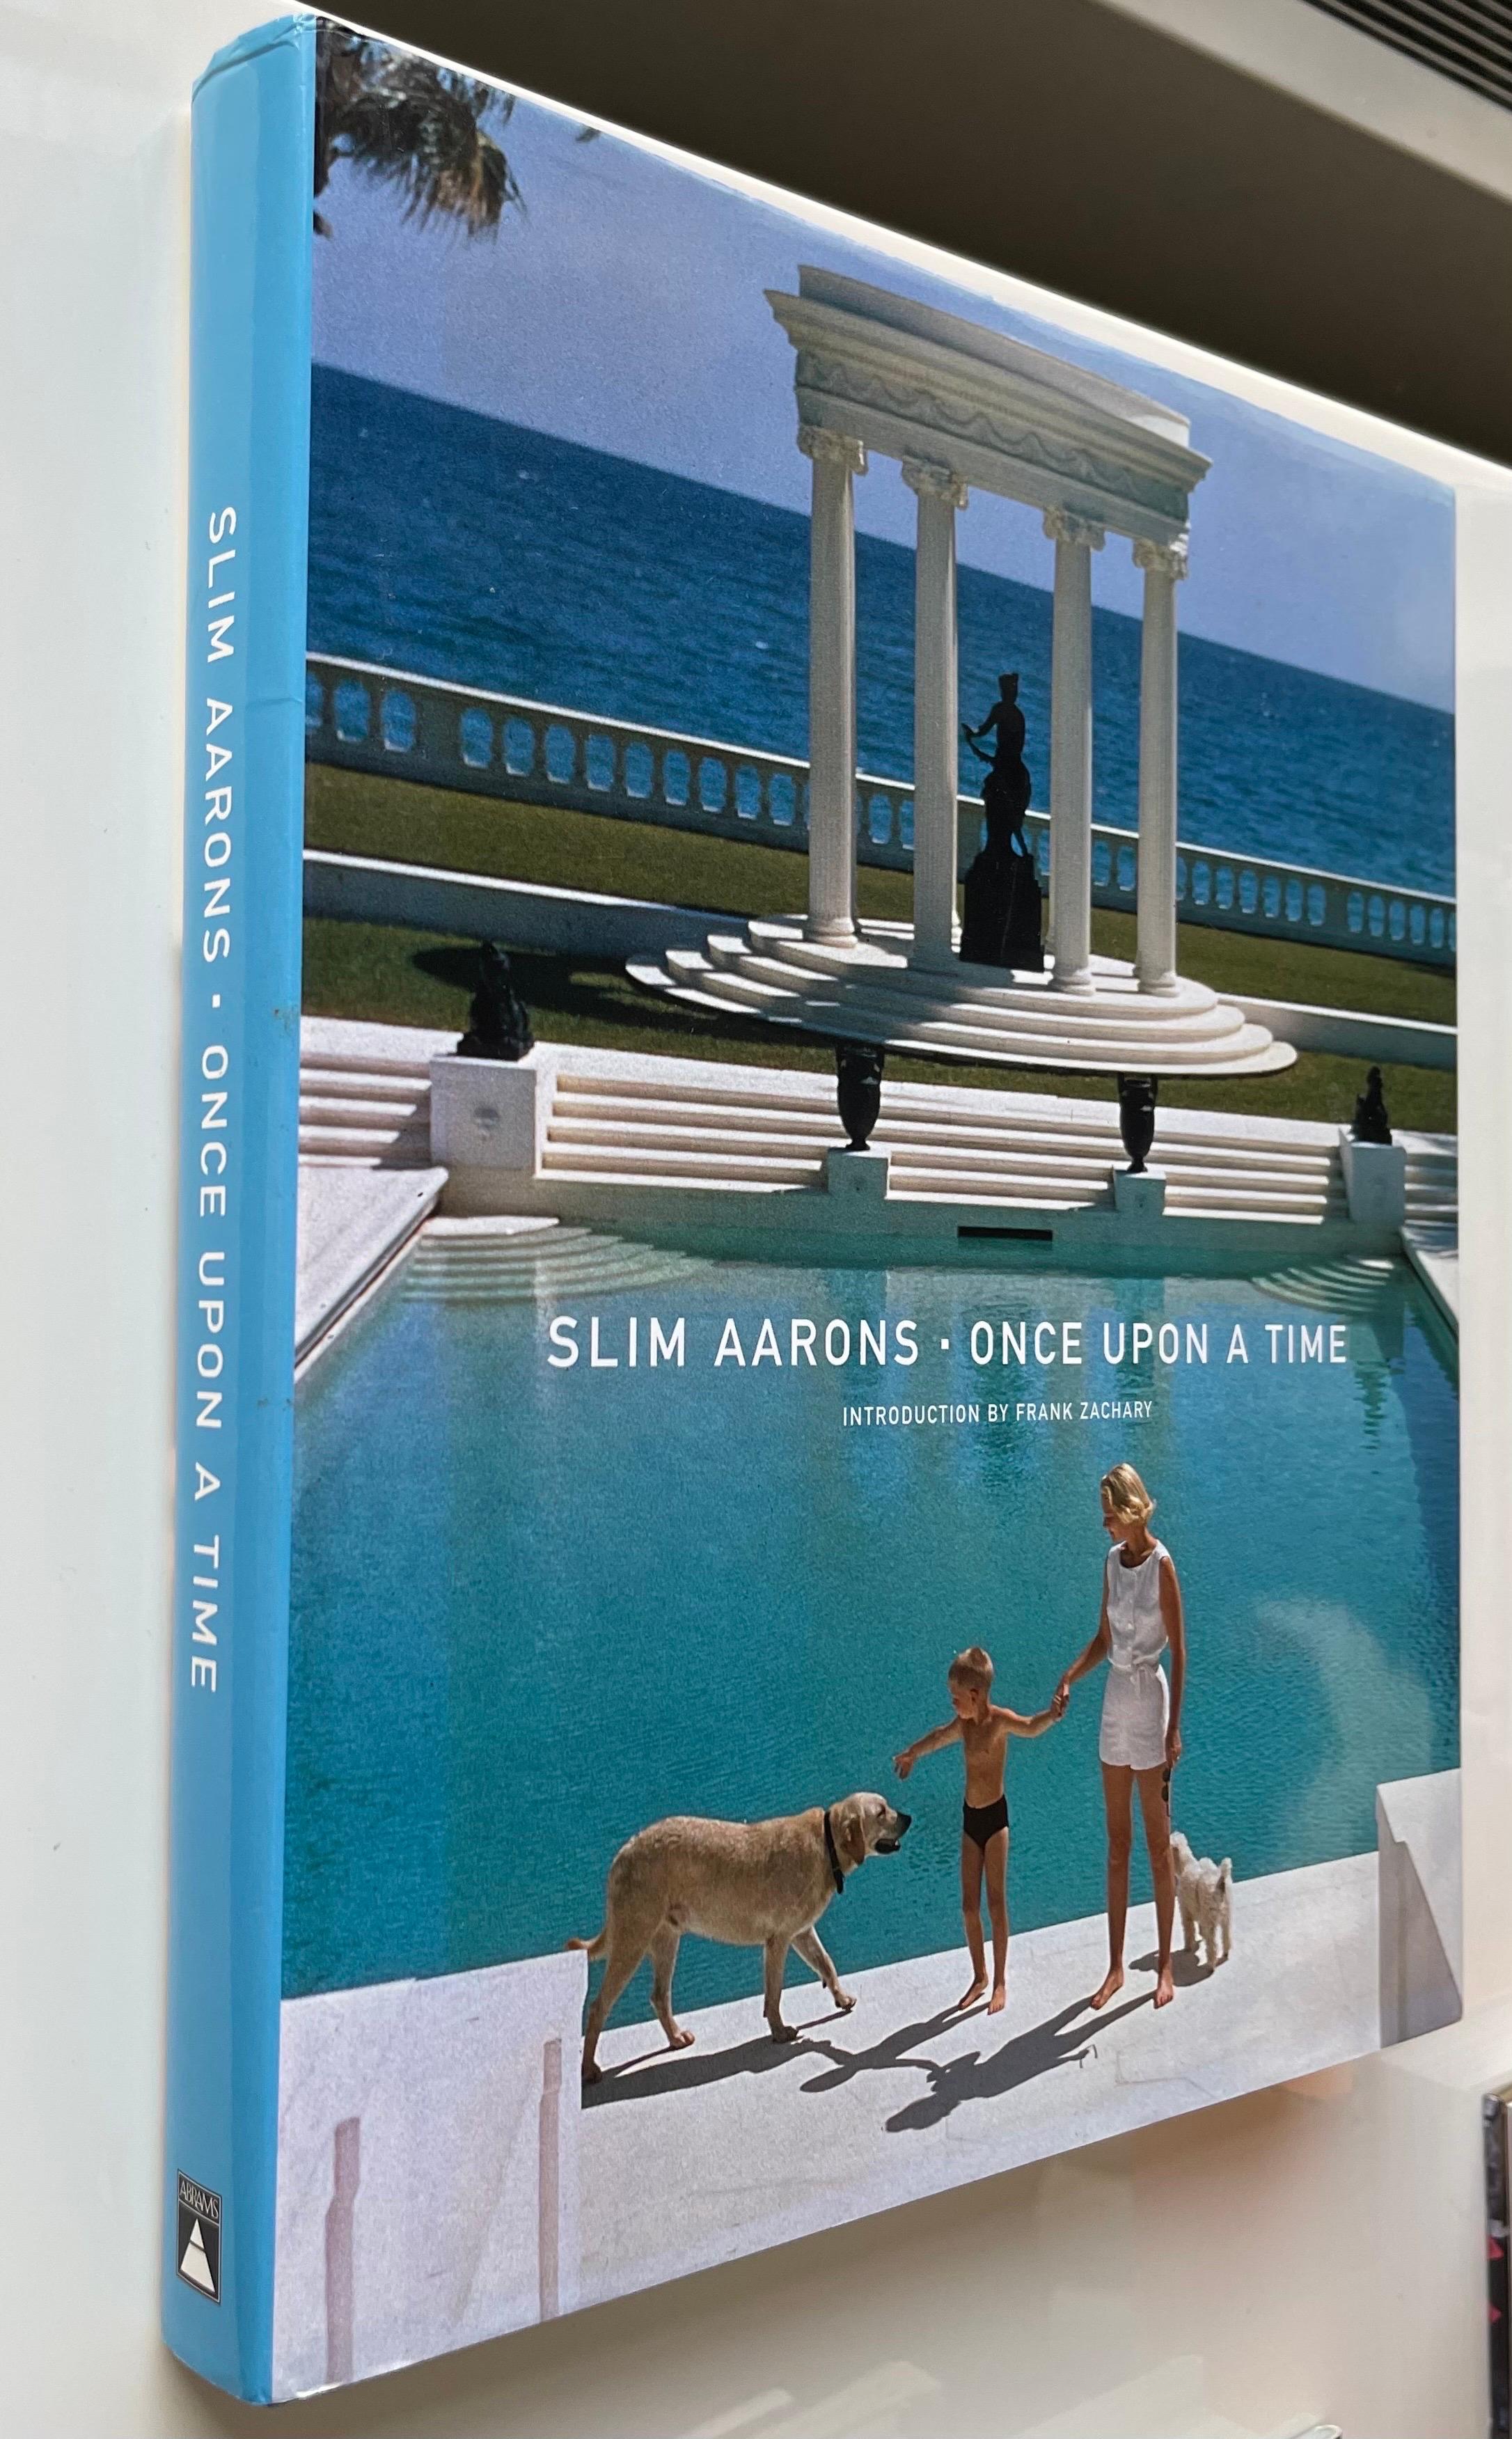 Slim Aarons: Once Upon A Time. Abrams 1st edition hardcover, 2003. 240 pages. Featuring many of Slim Aarons iconic photographs. 